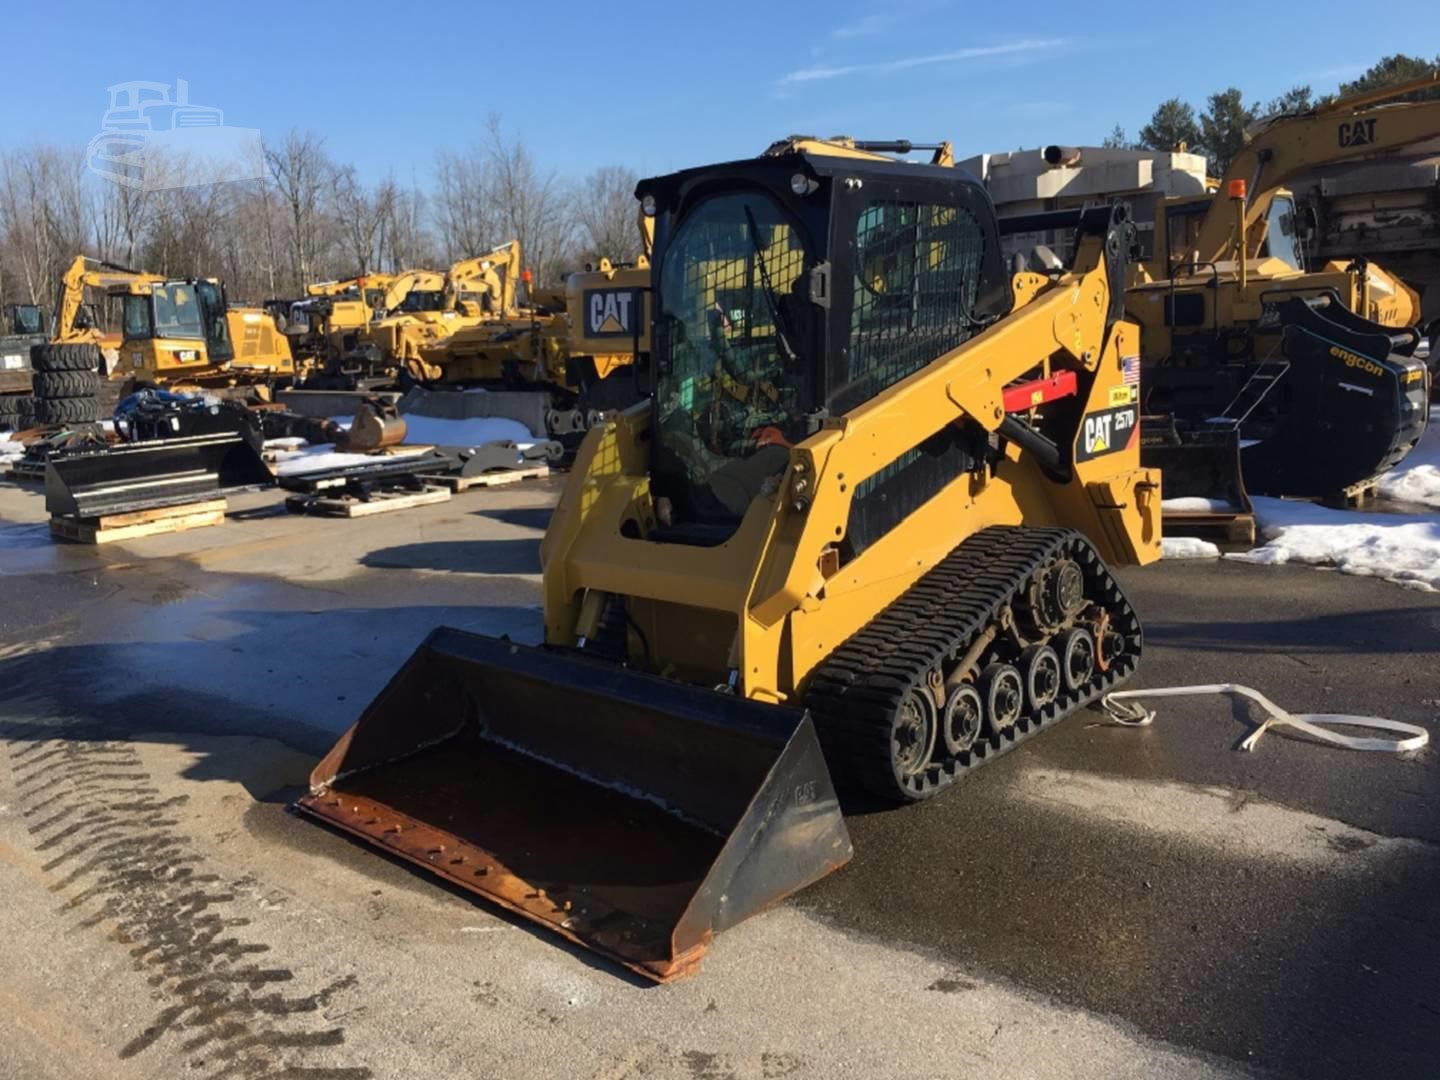 2015 CAT 257D For Sale In Scarborough, Maine | MachineryTrader.com